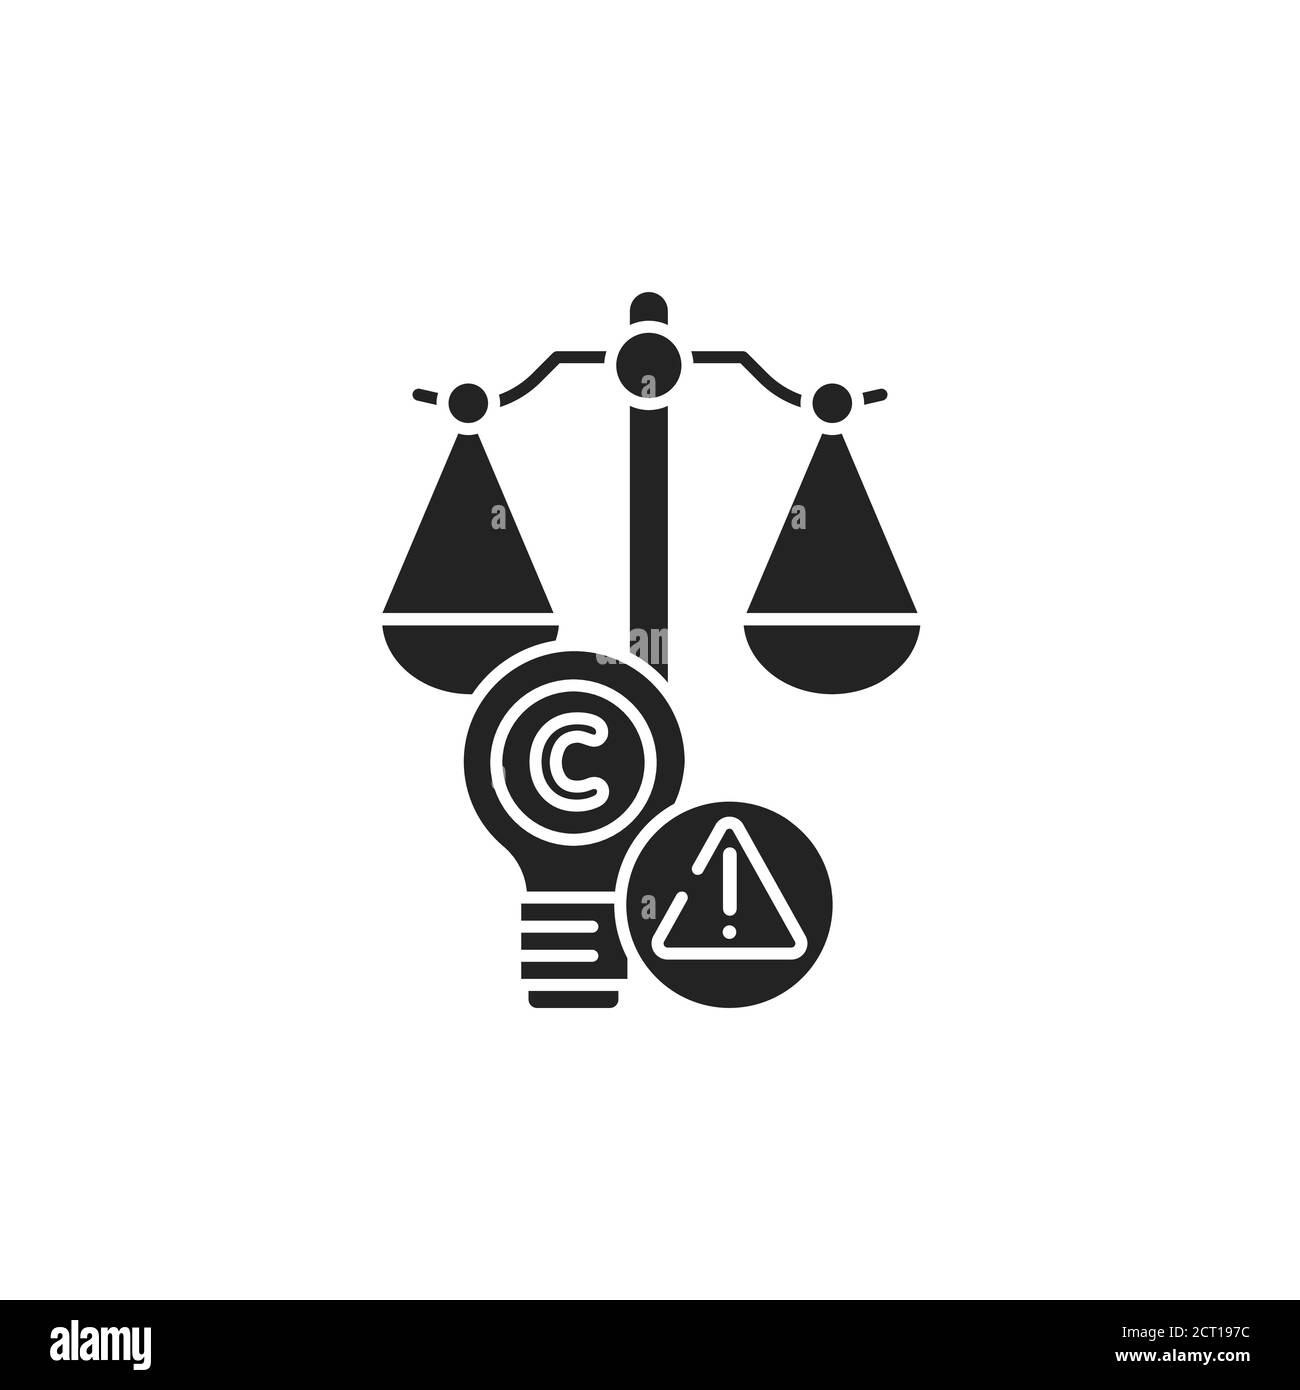 Arbitration court glyph black icon. Intellectual property infringement concept. Copyright law element. Sign for web page, mobile app, button, logo. Stock Vector